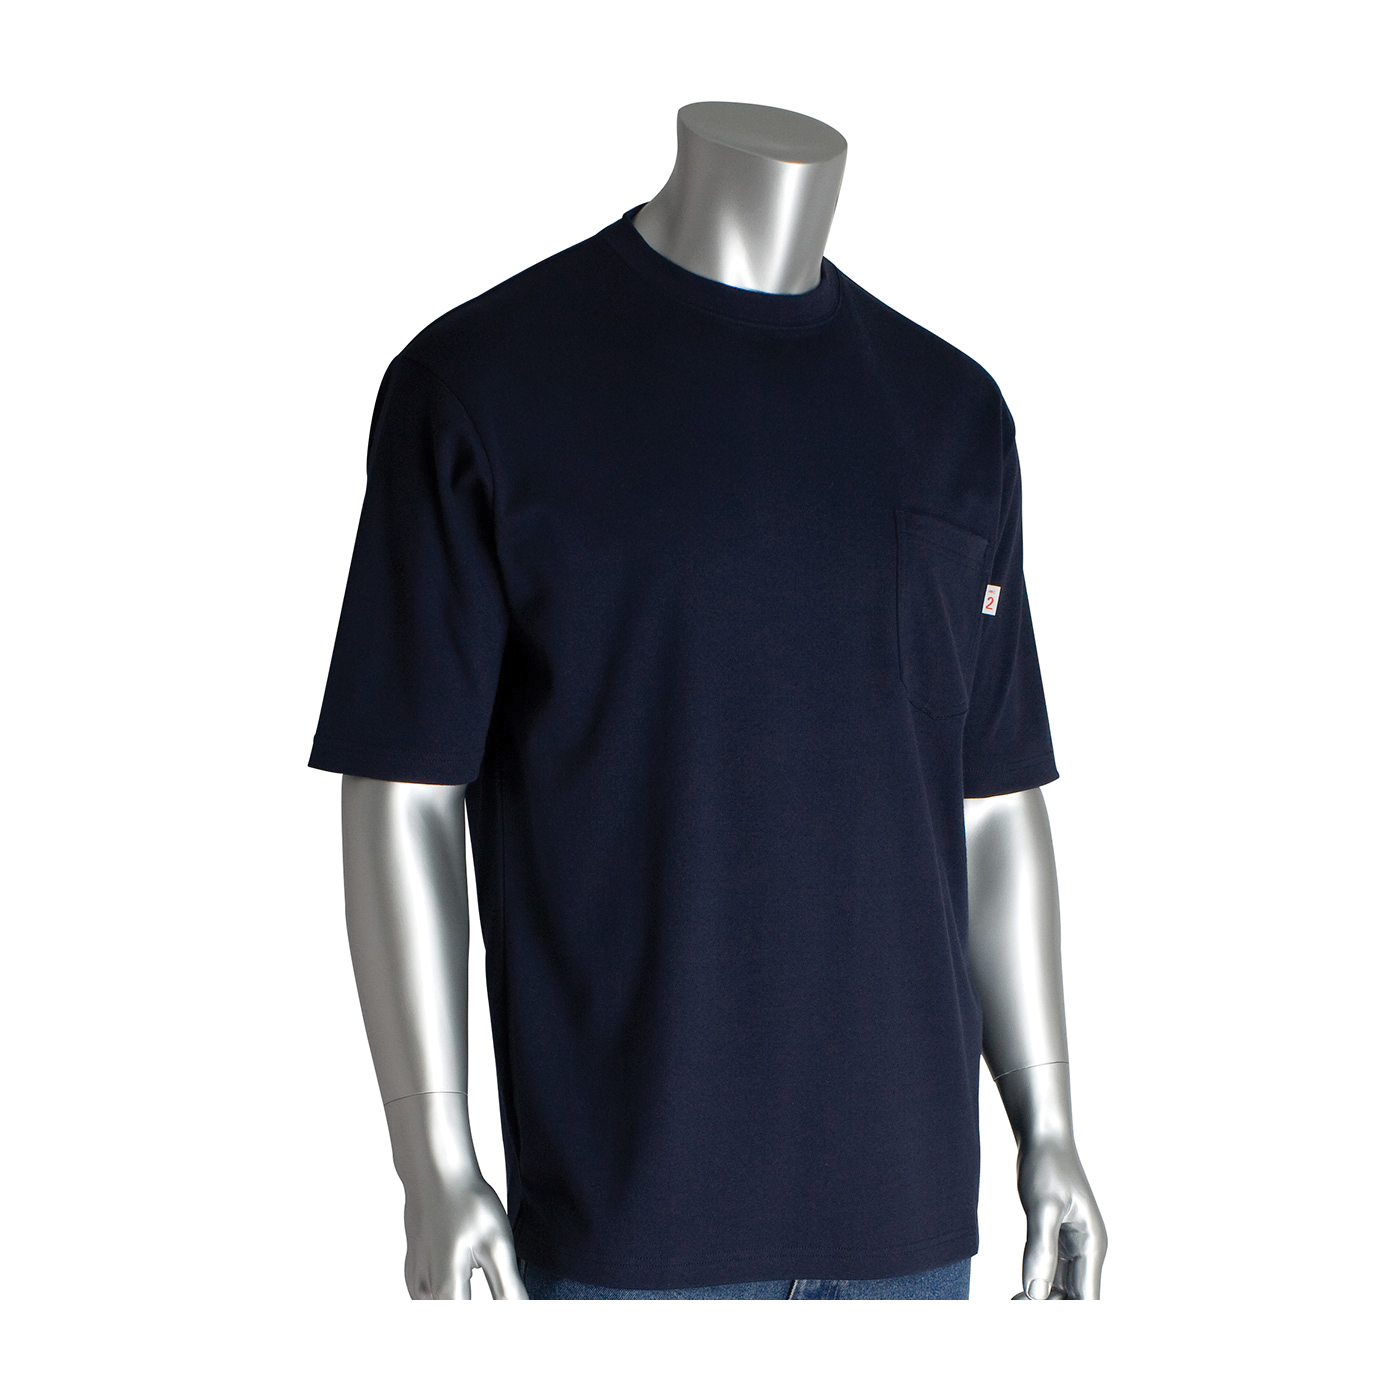 PIP® 385-FRSS-NV/3X Arc and Flame-Resistant Short Sleeve T-Shirt, 3XL, Navy, Cotton Interlock Knit, 35 in L